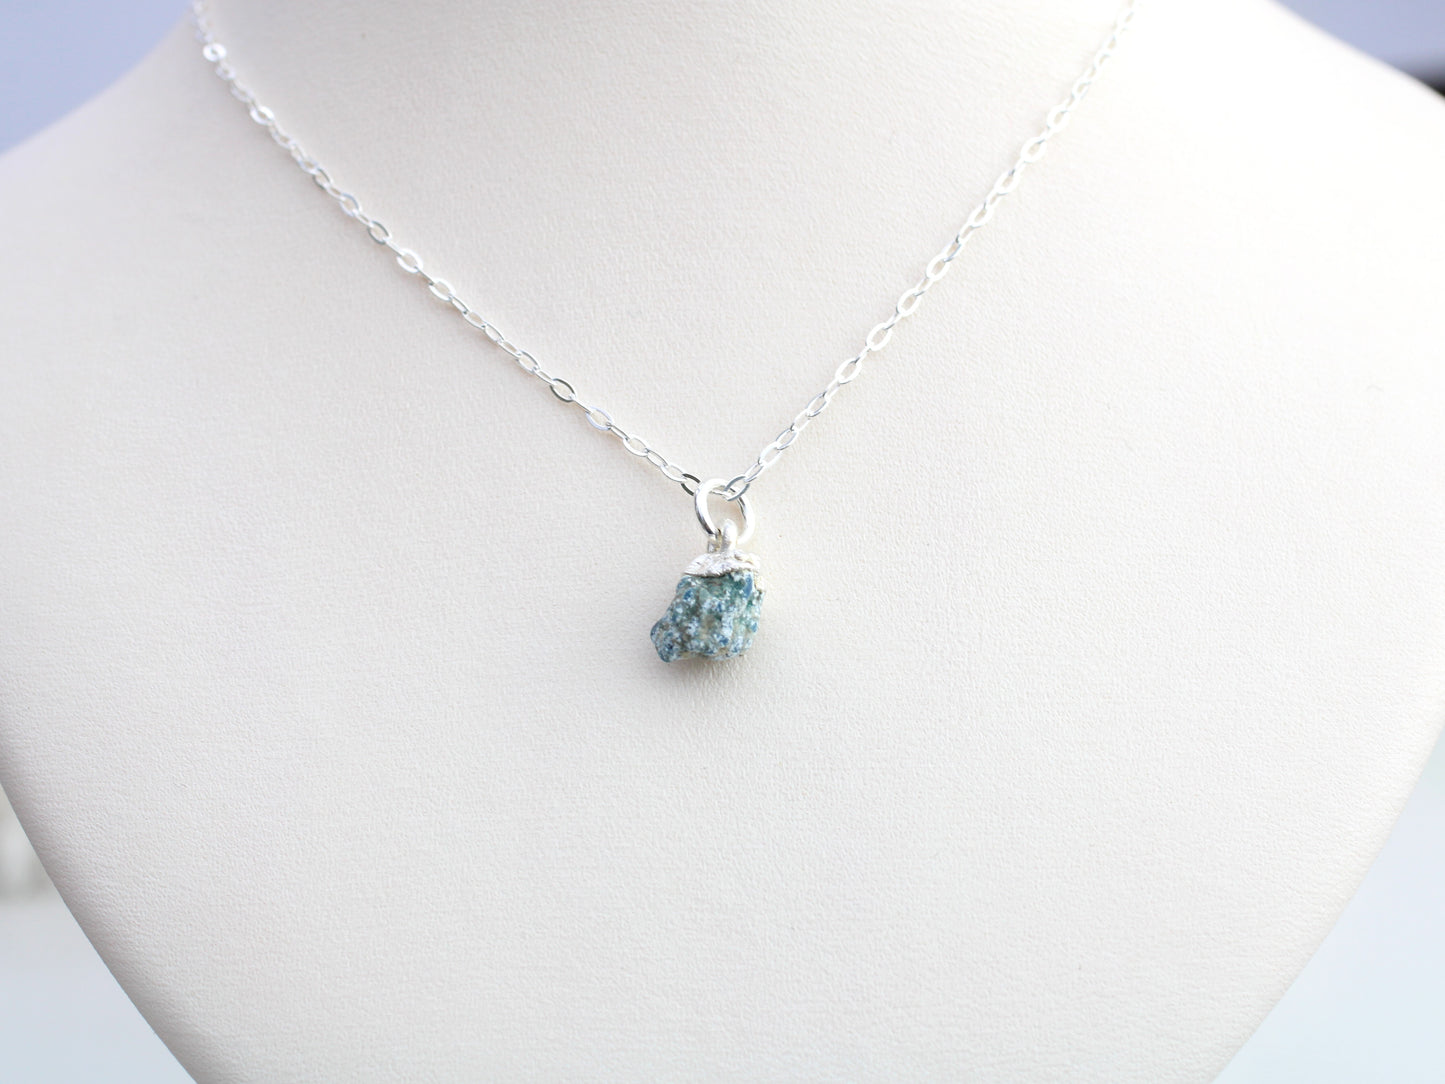 Raw turquoise necklace. December birthstone necklace.